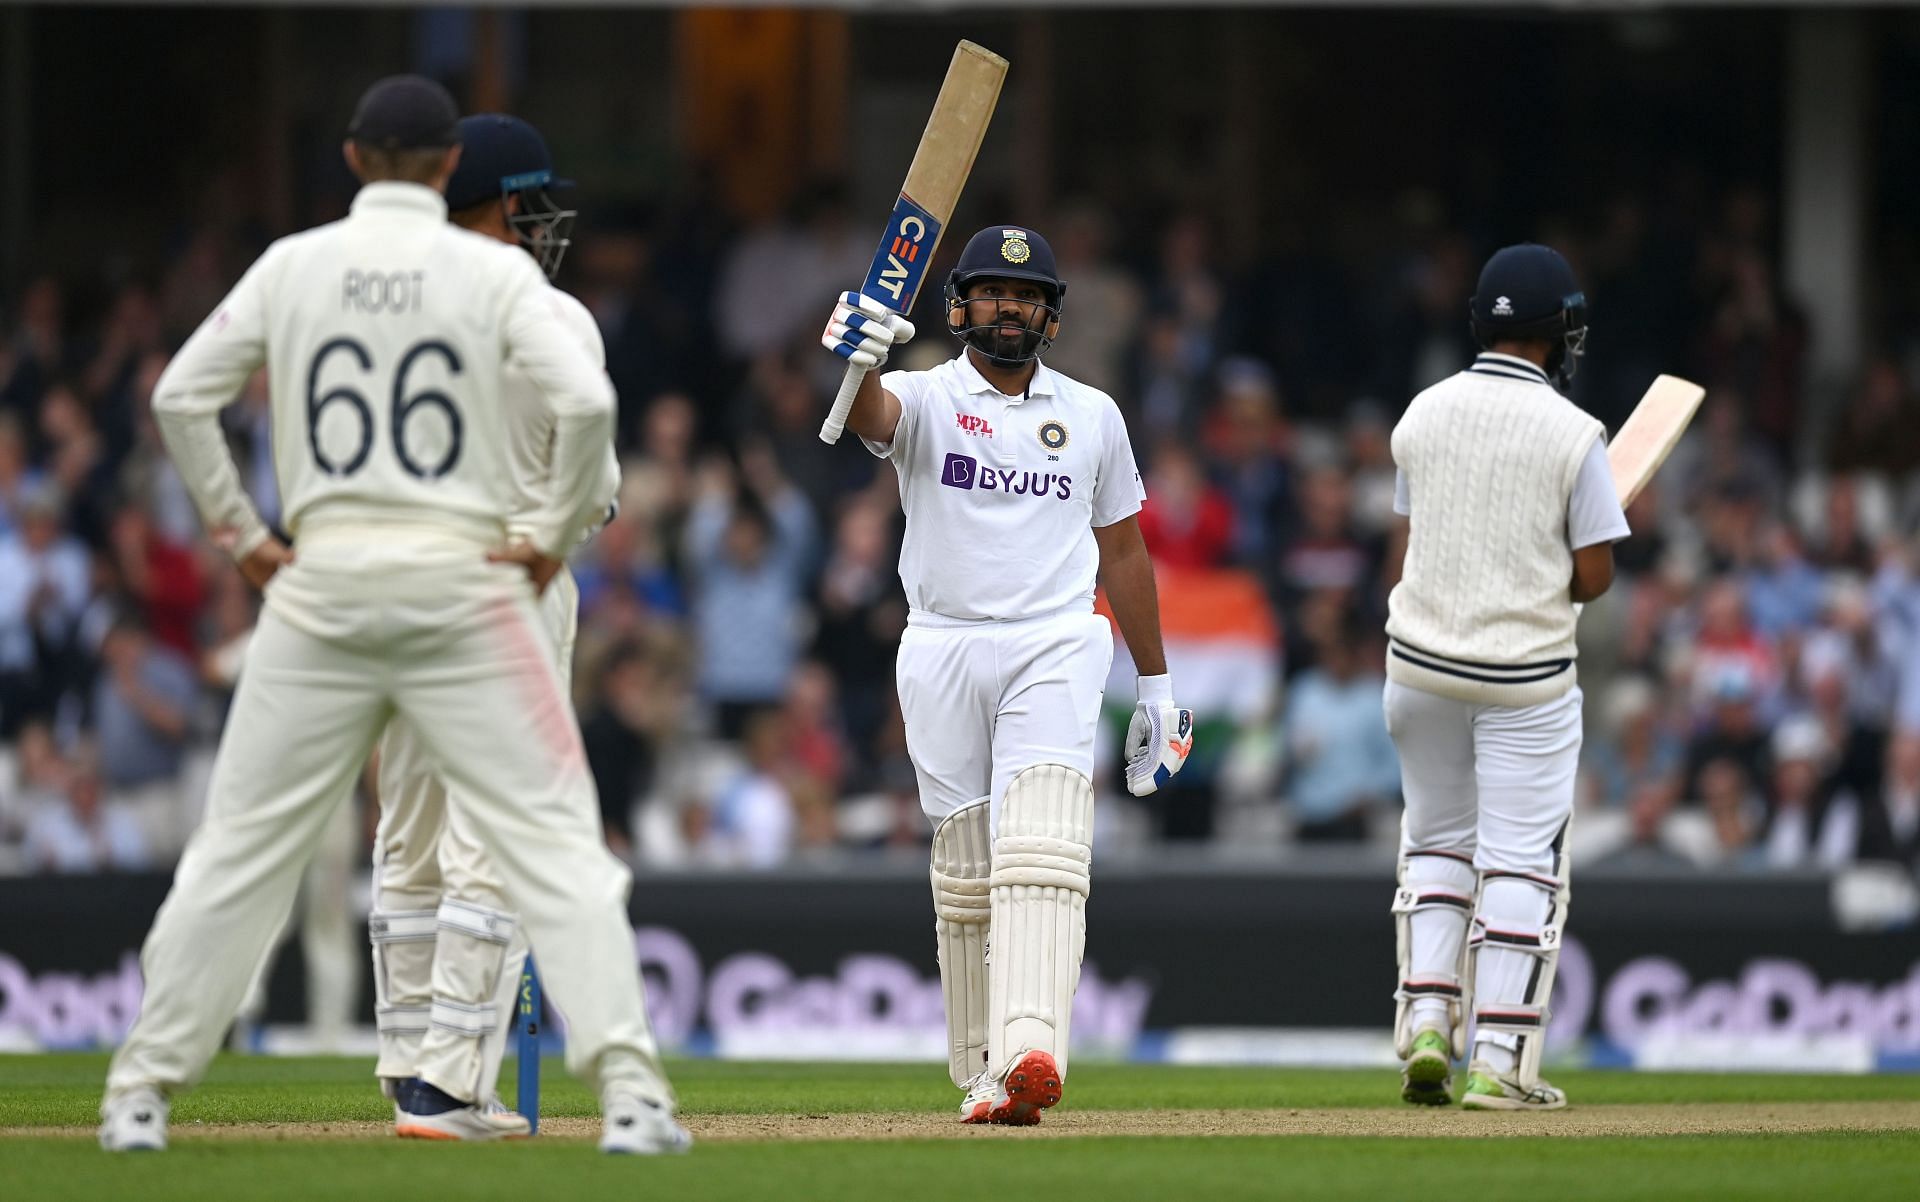 Rohit Sharma brought up his first overseas Test hundred against England in 2021 (Getty Images)